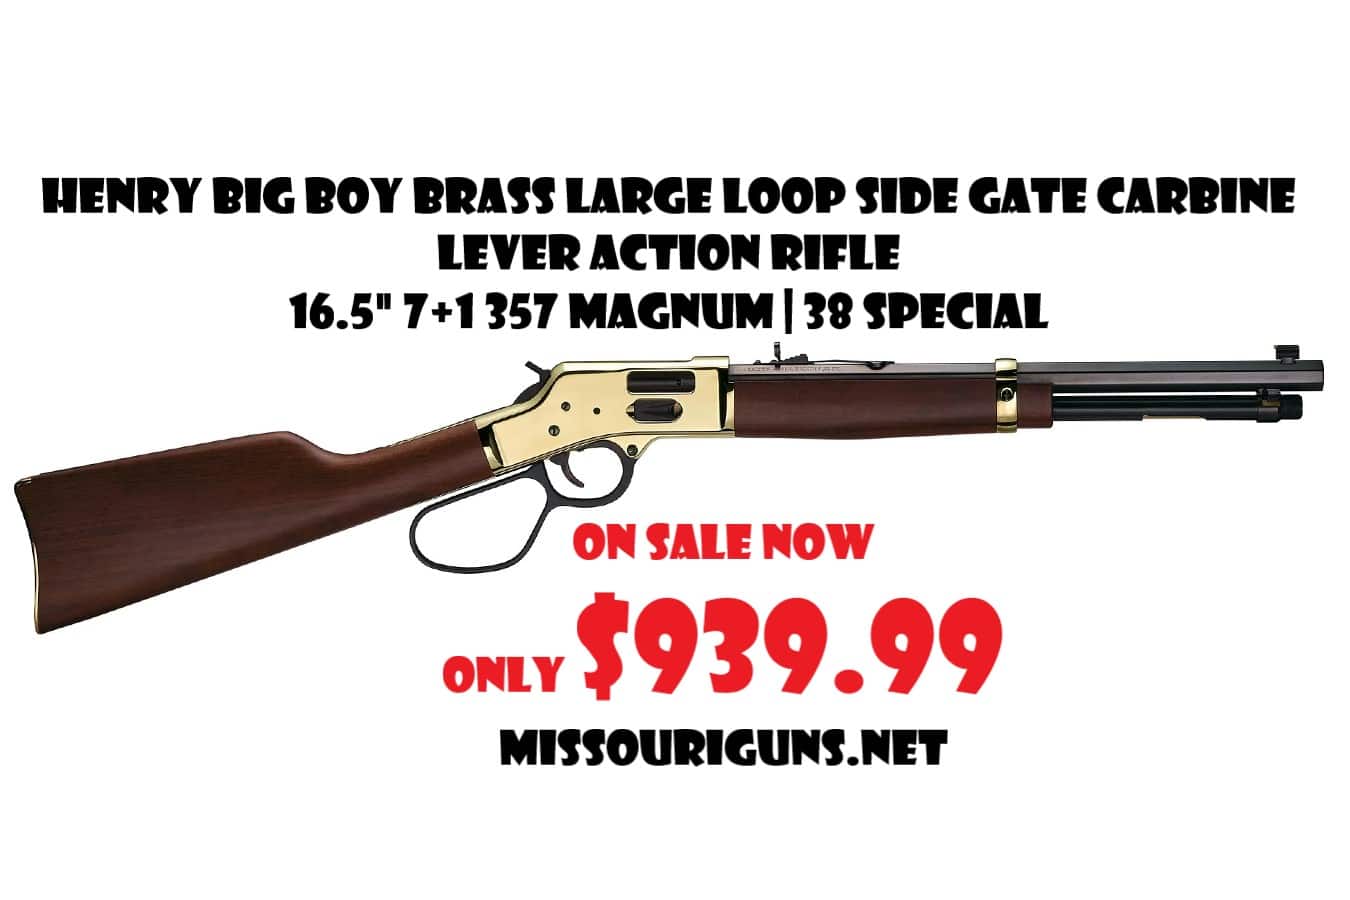 Side Gate Lever Action Rifle